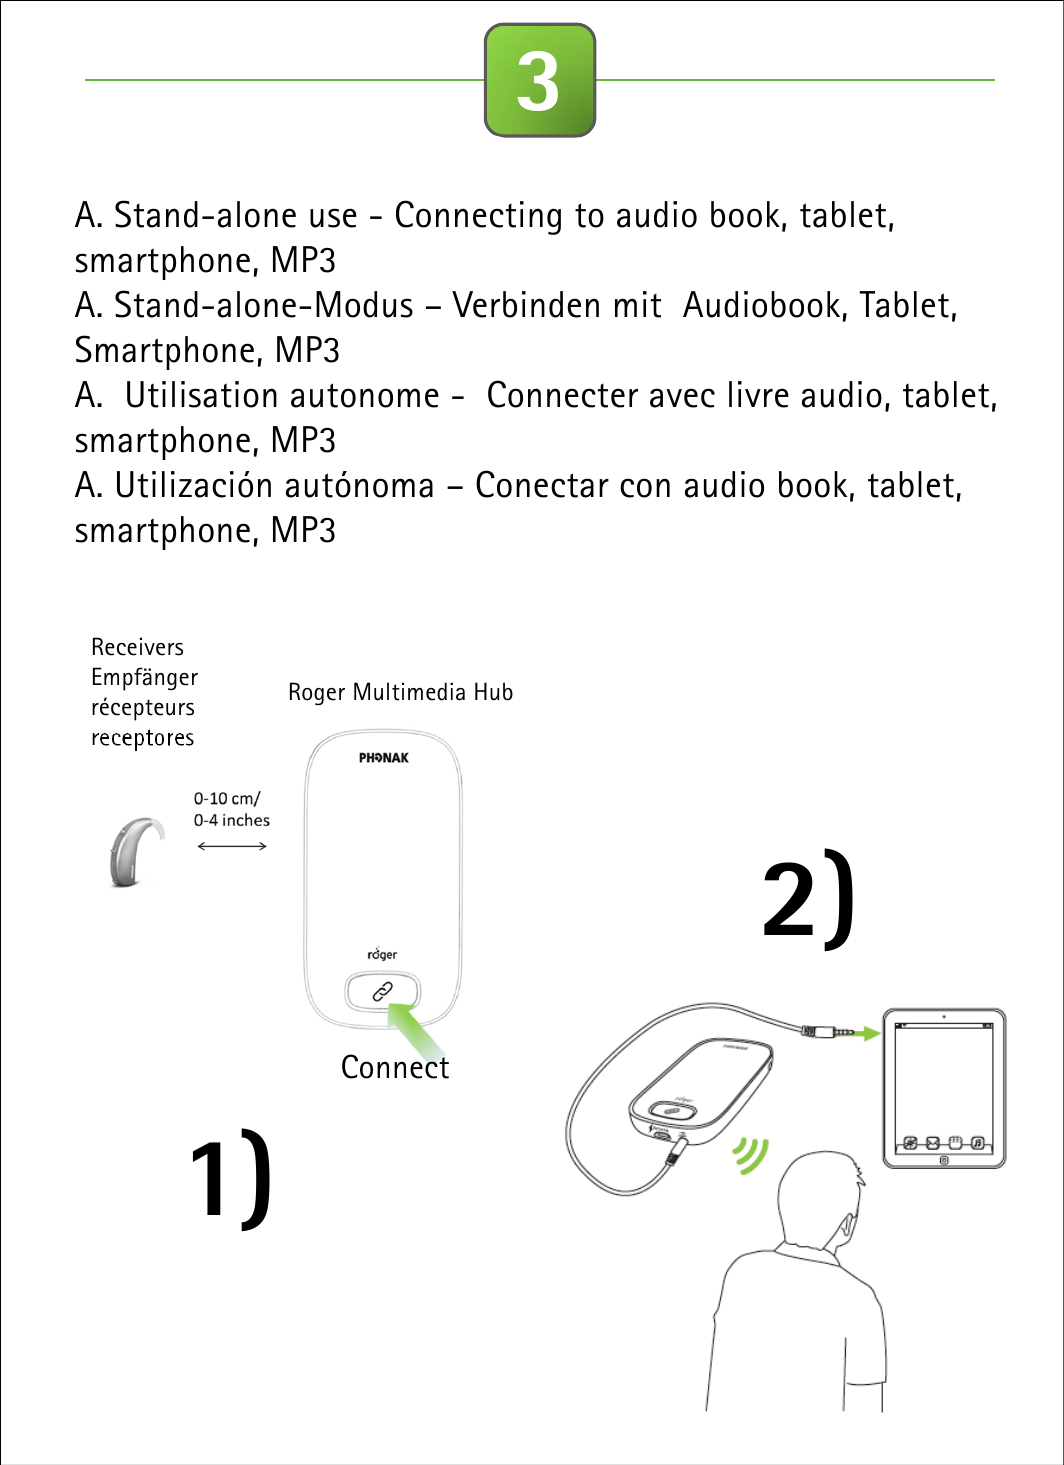 3A. Stand-alone use - Connecting to audio book, tablet, smartphone, MP3A. Stand-alone-Modus – Verbinden mit Audiobook, Tablet, Smartphone, MP3A.  Utilisation autonome - Connecter avec livre audio, tablet, smartphone, MP3A. Utilización autónoma – Conectar con audio book, tablet, smartphone, MP31) Receivers Empfängerrécepteursreceptores2) Roger Multimedia HubConnect